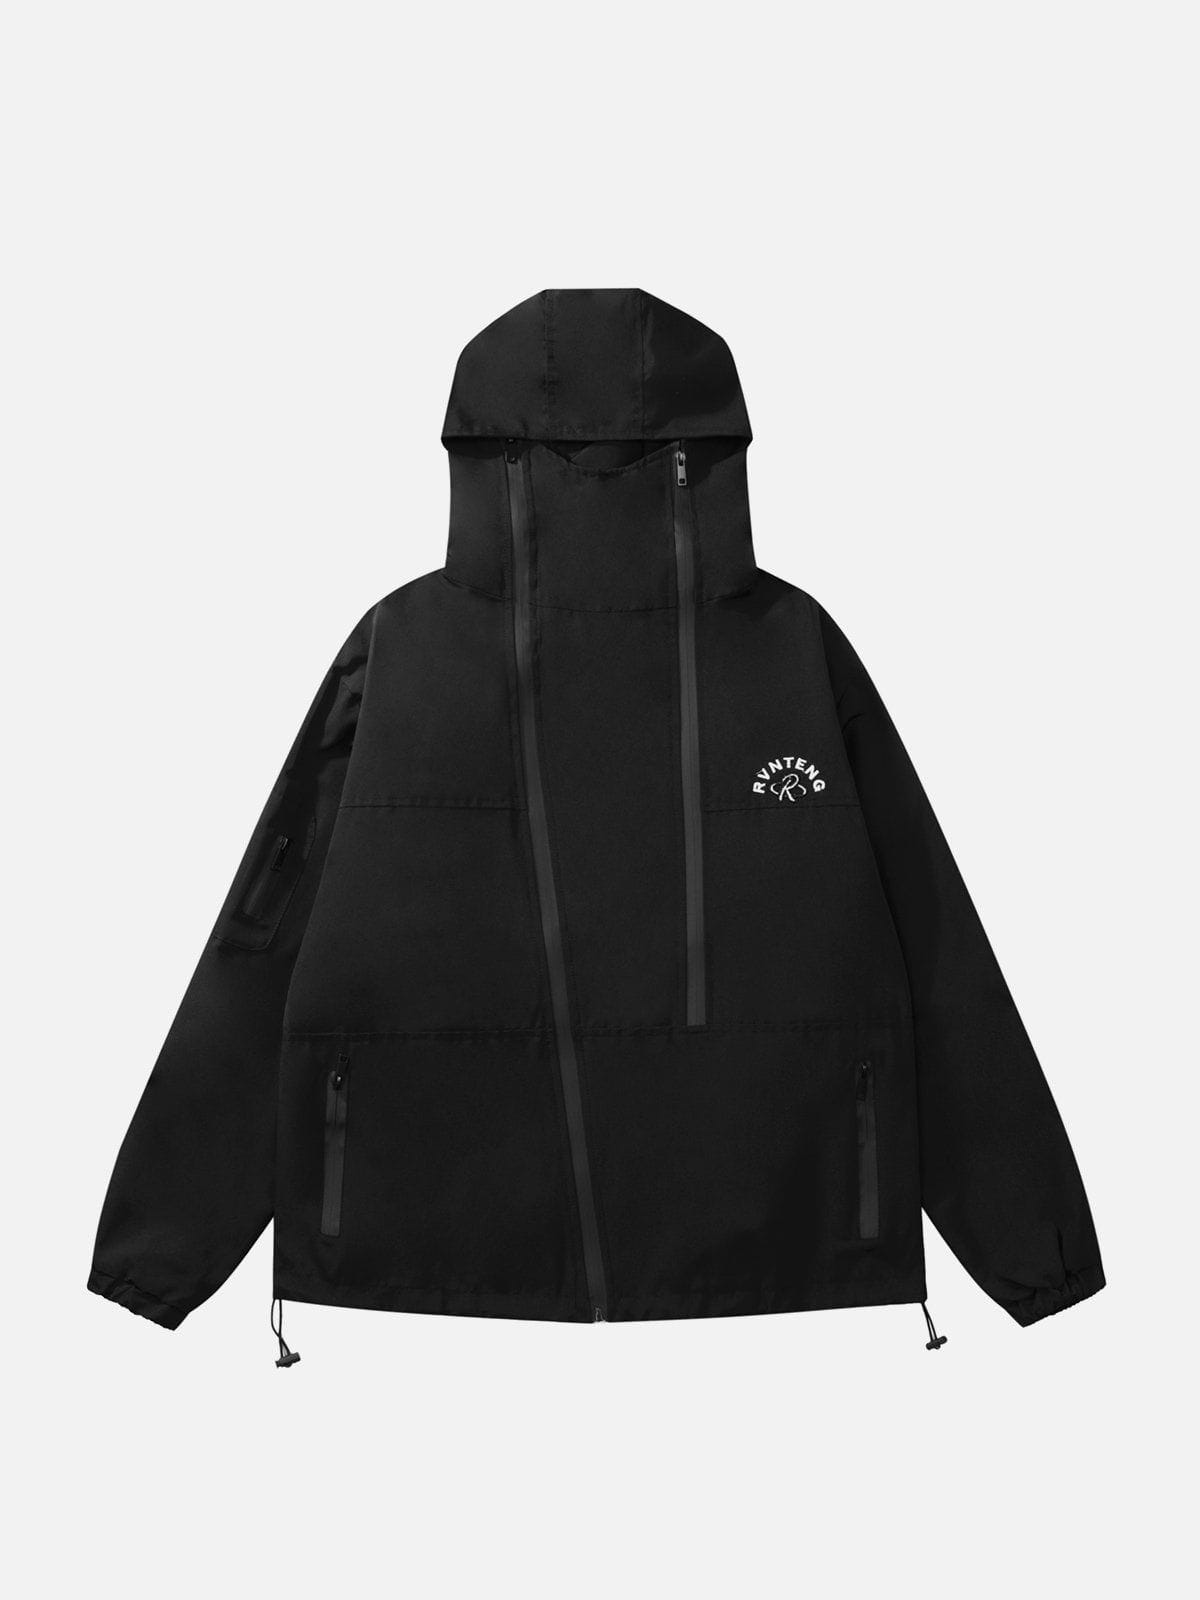 Majesda® - Embroidered Double Zip Hooded Anorak outfit ideas, streetwear fashion - majesda.com